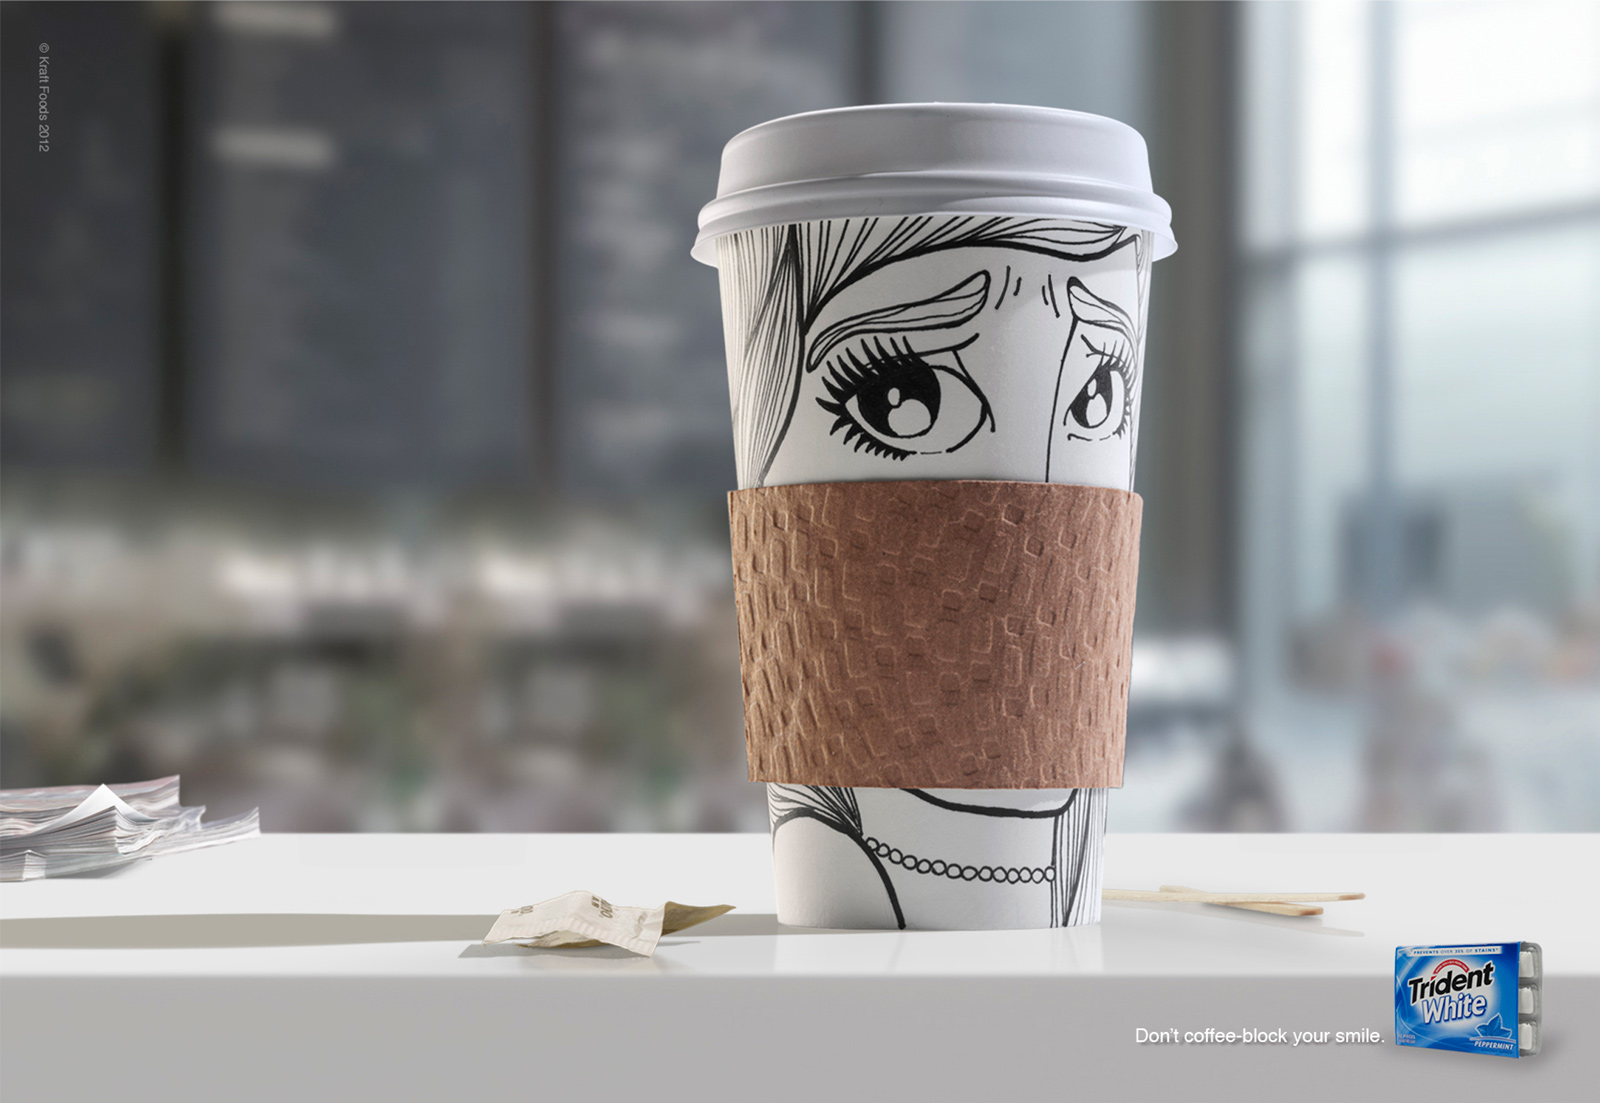 Trident White: Coffee block Panasonic Eluga - A Smartphone that works both ways. Campaigns of the World®